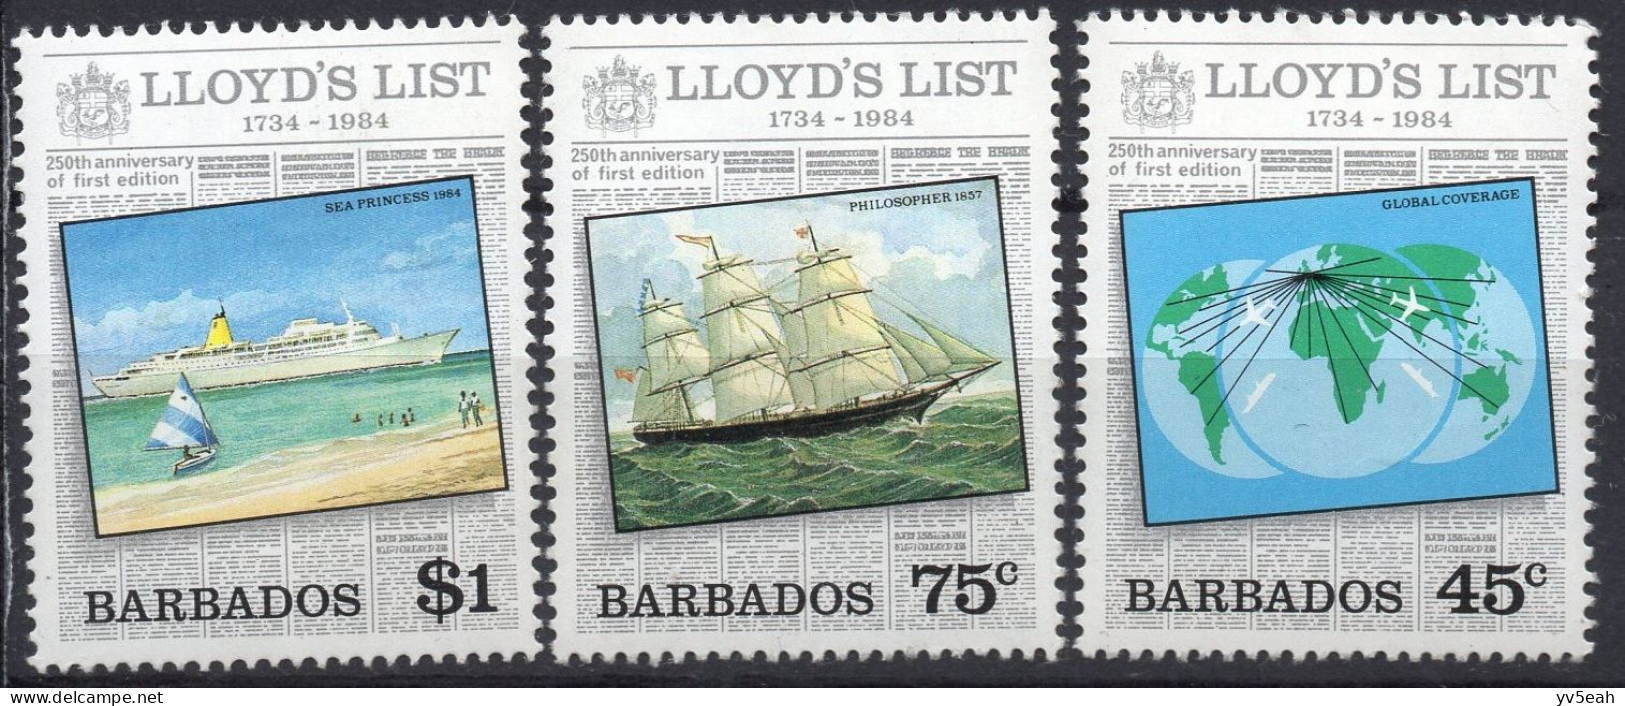 BARBADOS/1984/MNH/SC#627, 629-30/ LLOYD'S LIST ISSUE / SHIPS /MAP /50c MISSED - Barbados (1966-...)